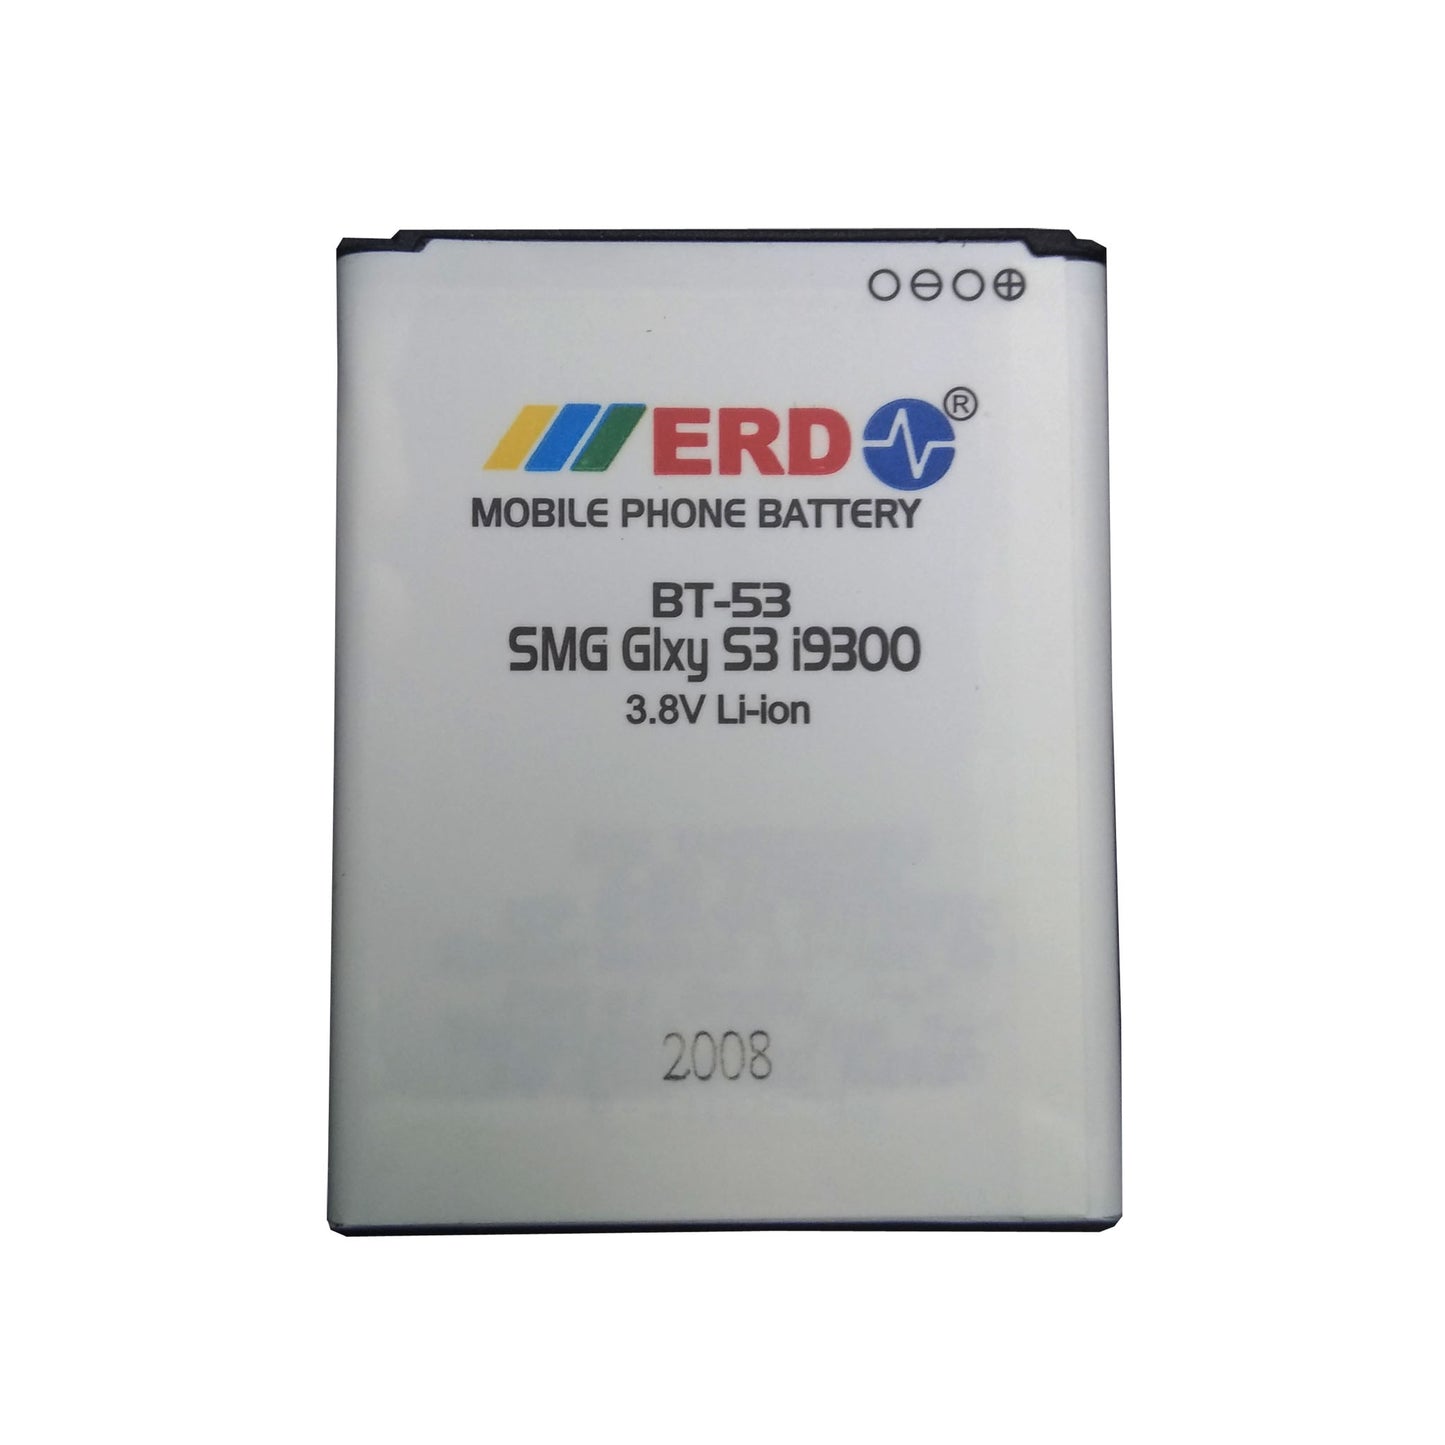 Mobile Phone High Capacity Battery for Samsung Galaxy S3 i9300